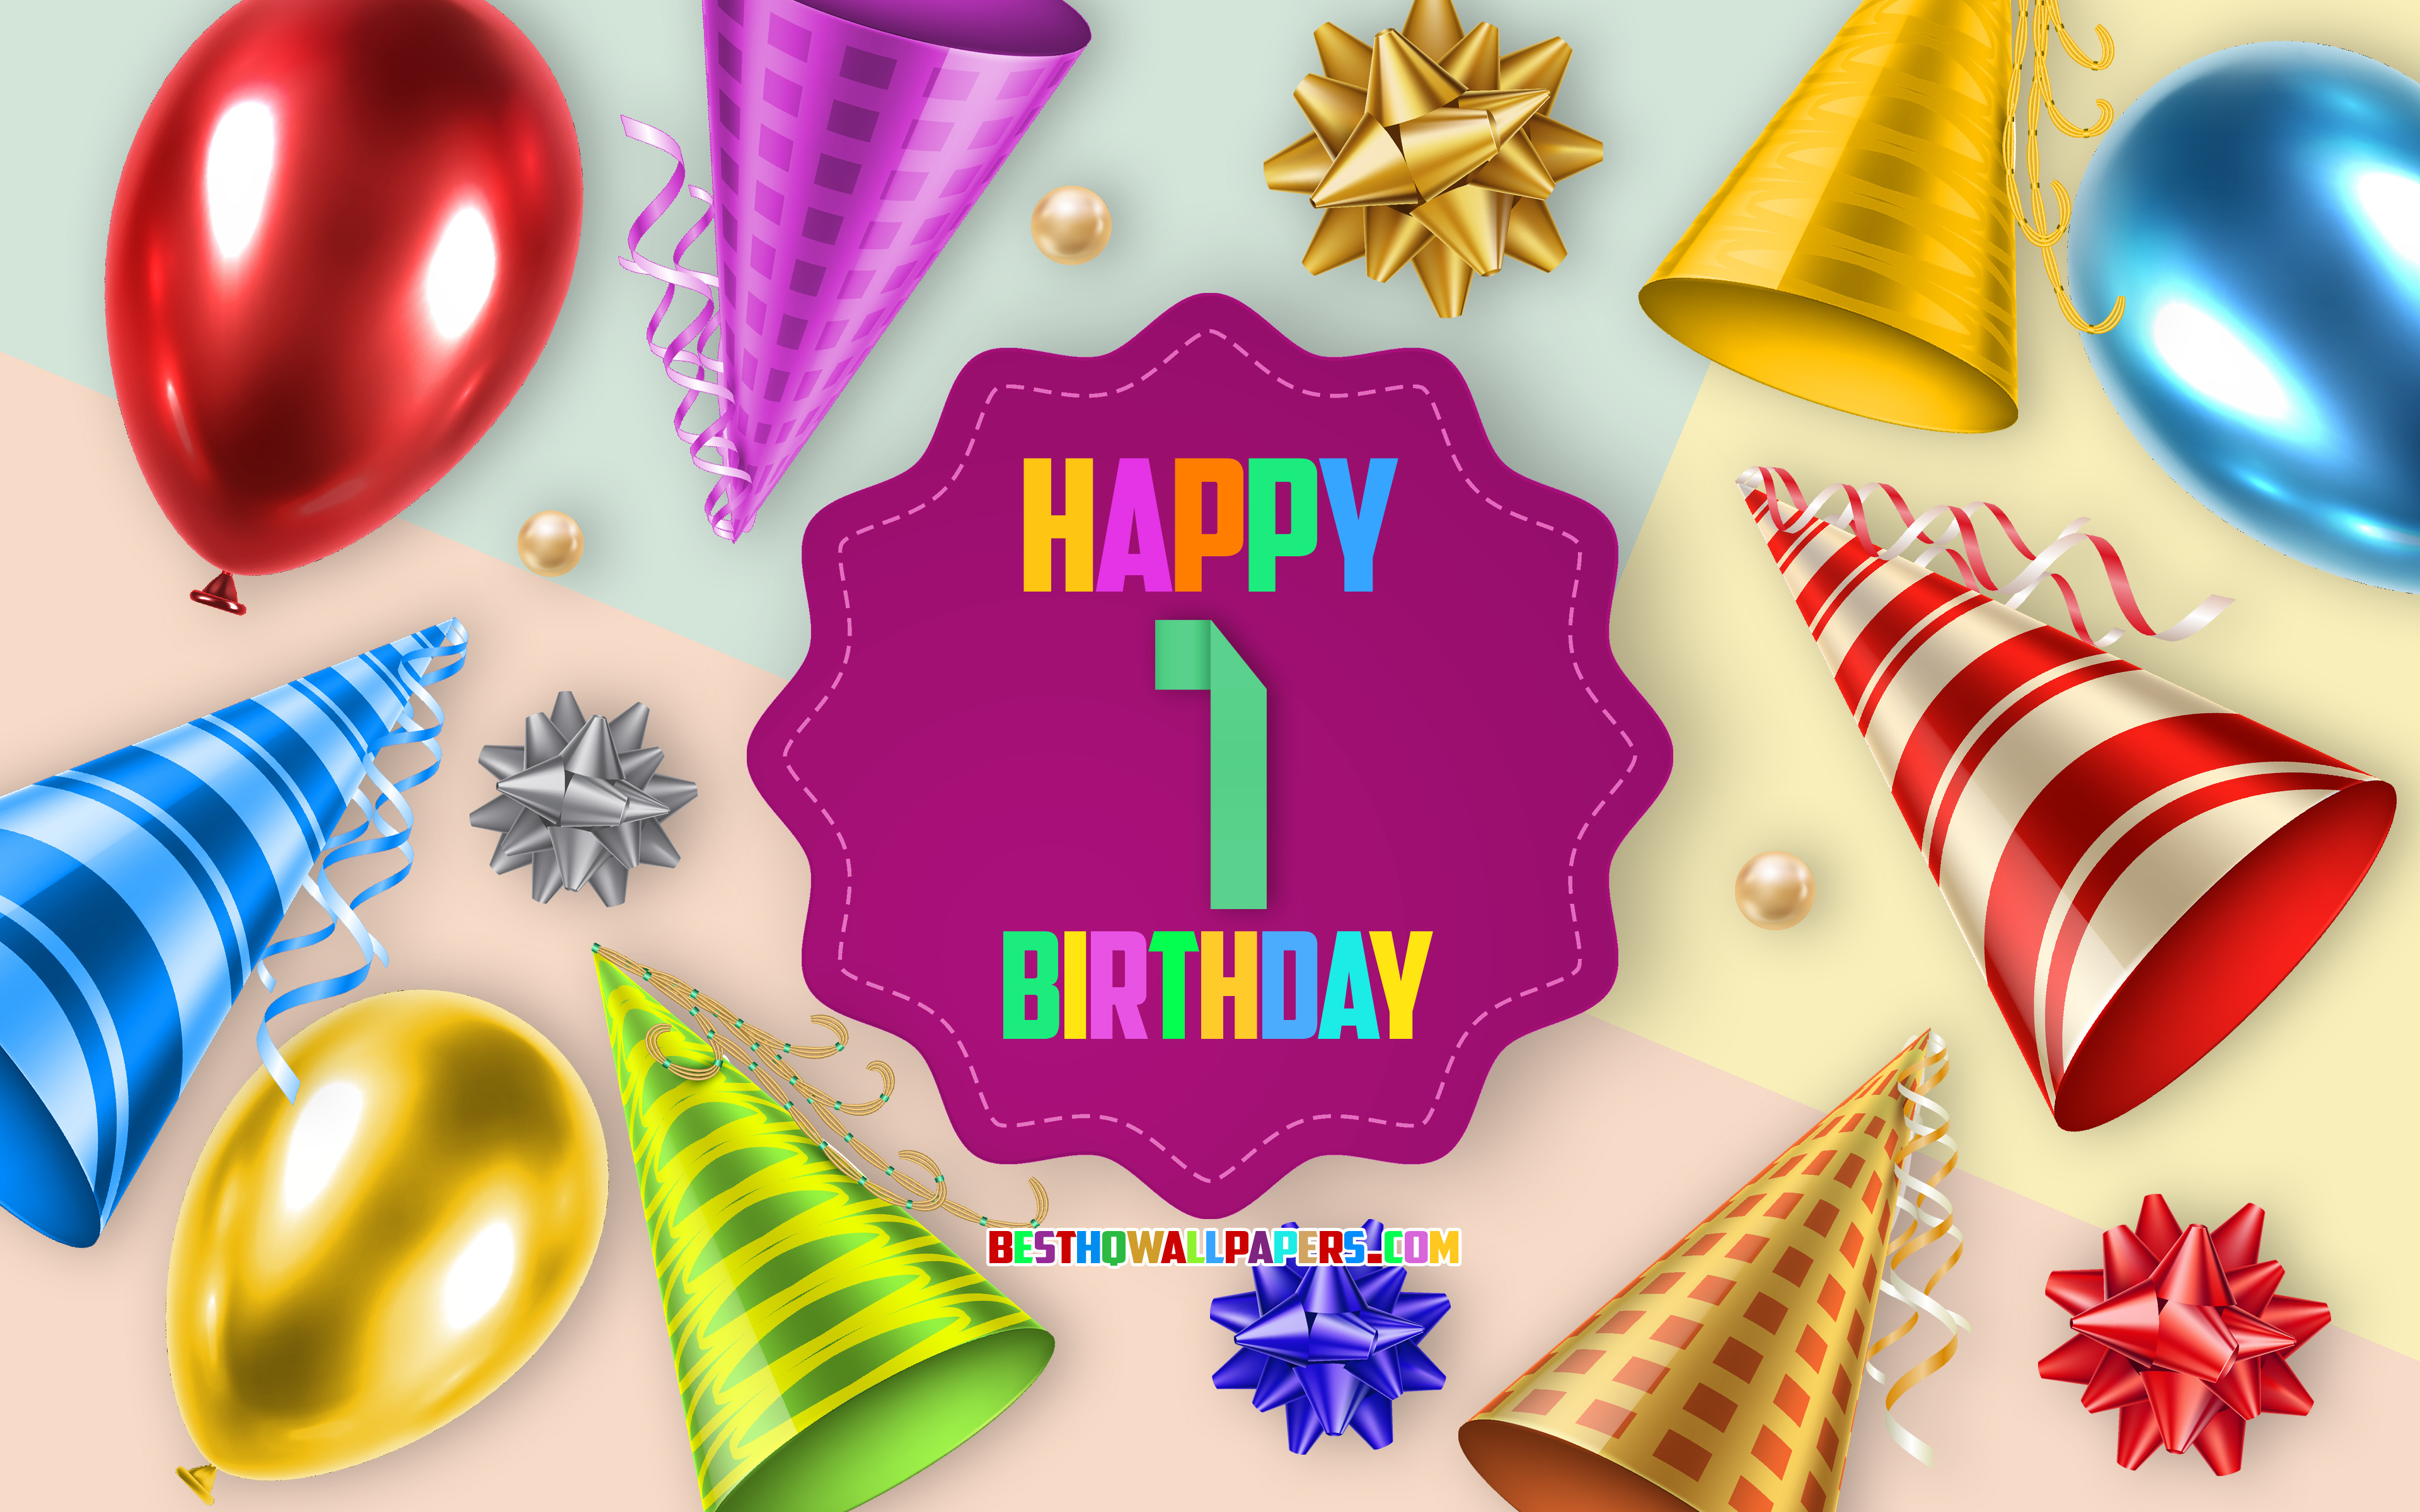 Download wallpaper Happy 1 Year Birthday, Greeting Card, Birthday Balloon Background, creative art, Happy 1st birthday, silk bows, 1st Birthday, Birthday Party Background for desktop with resolution 3840x2400. High Quality HD picture